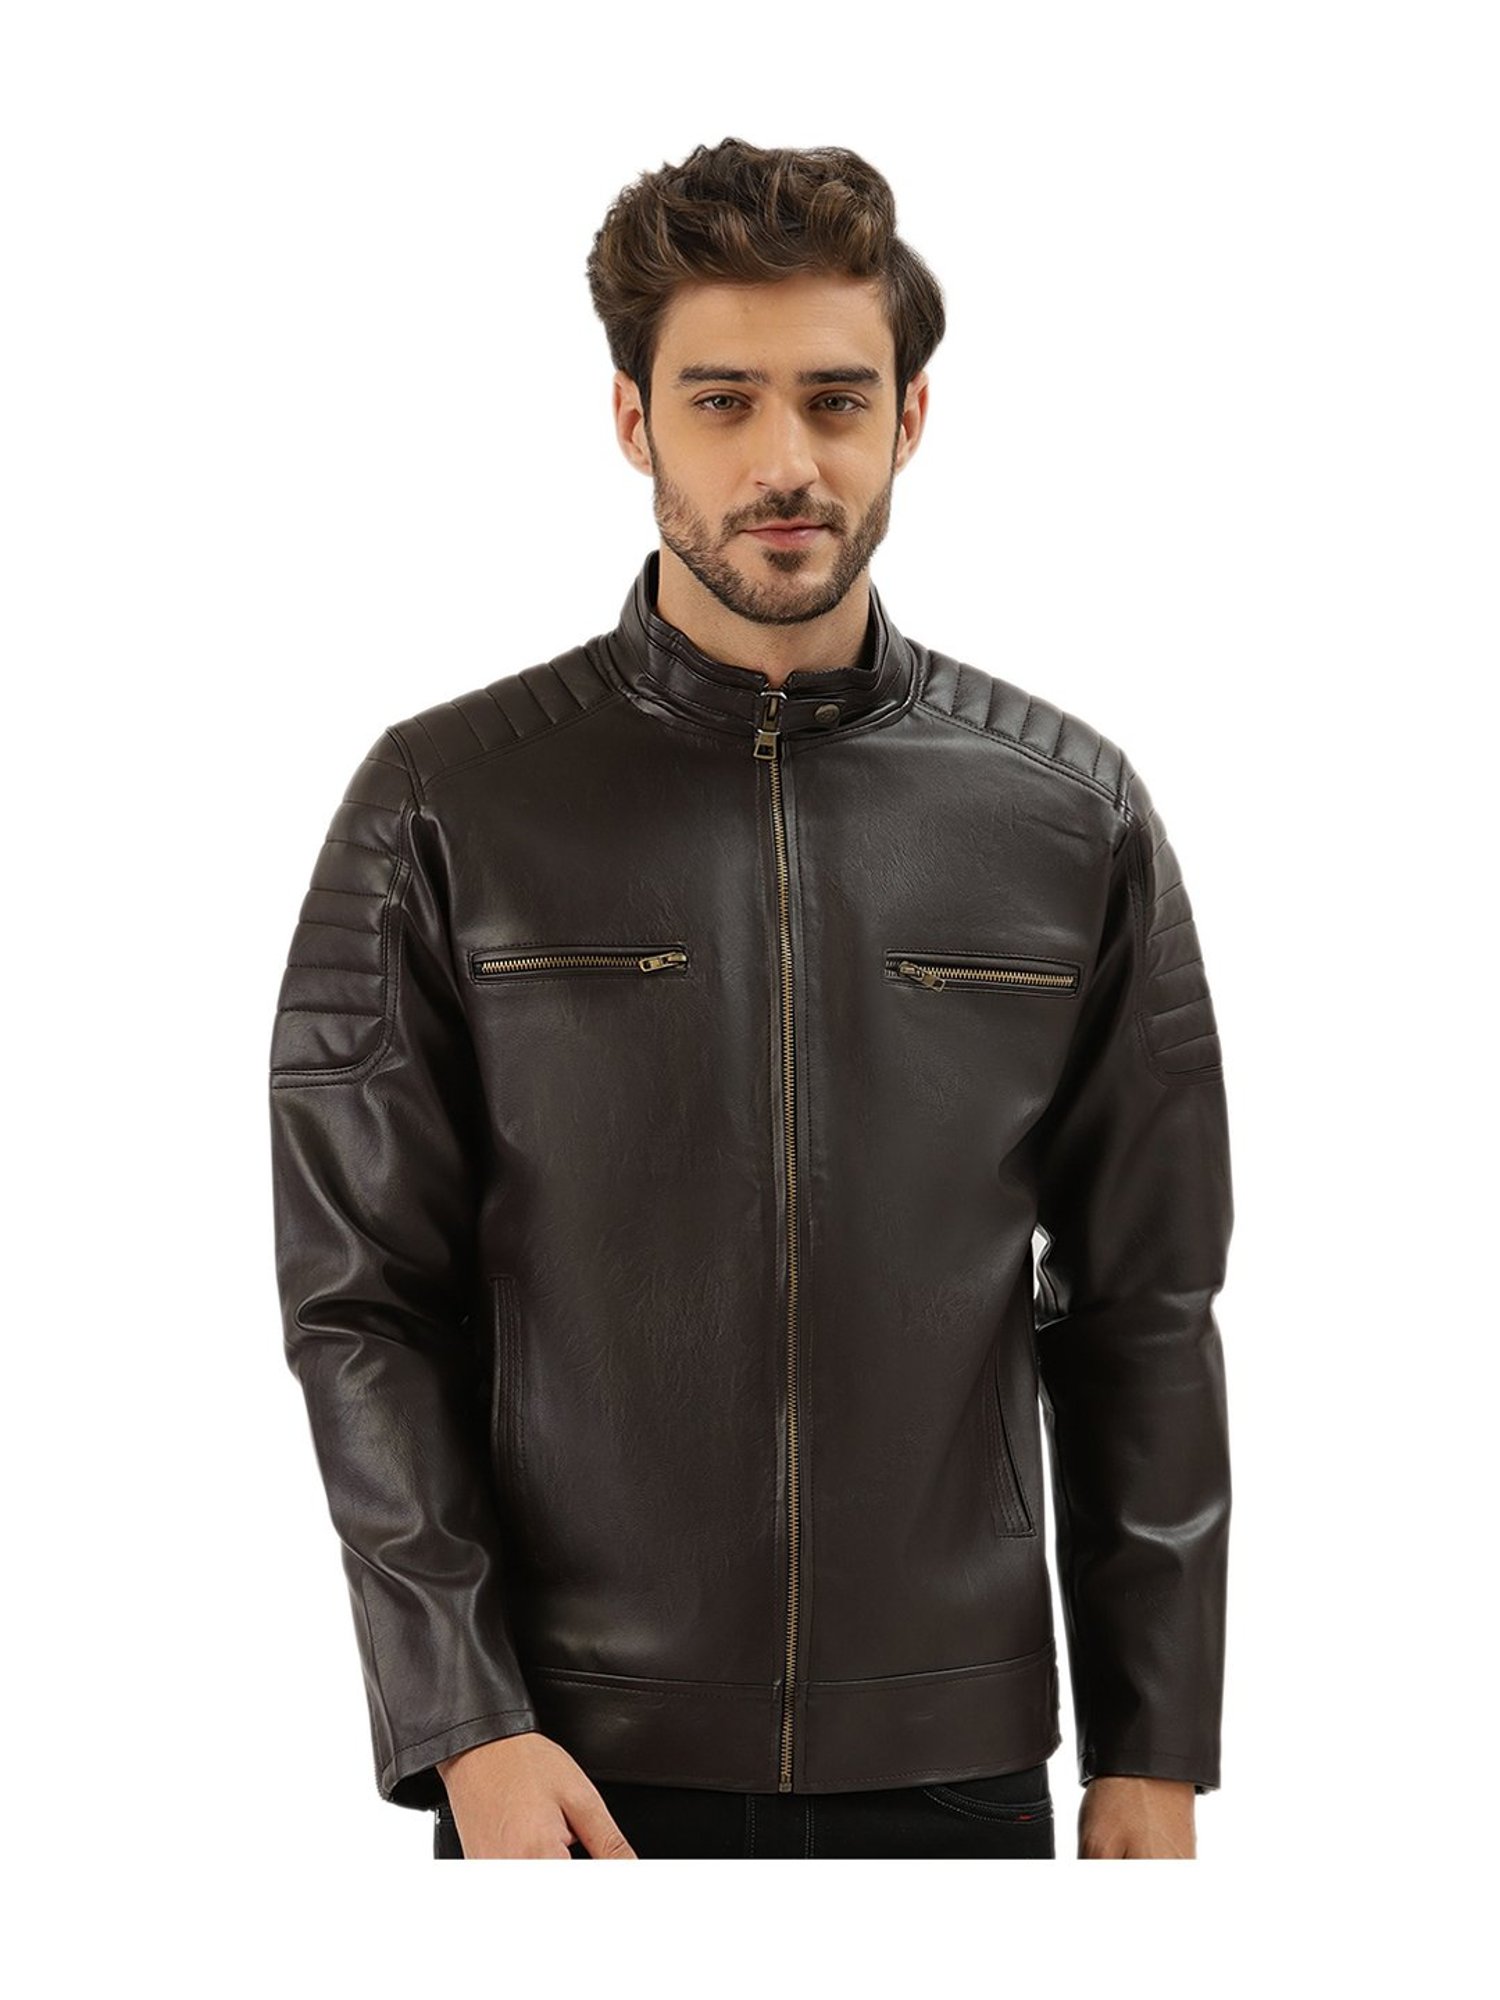 Justin Dark Brown Quilted Leather Jacket - Leather Skin Shop